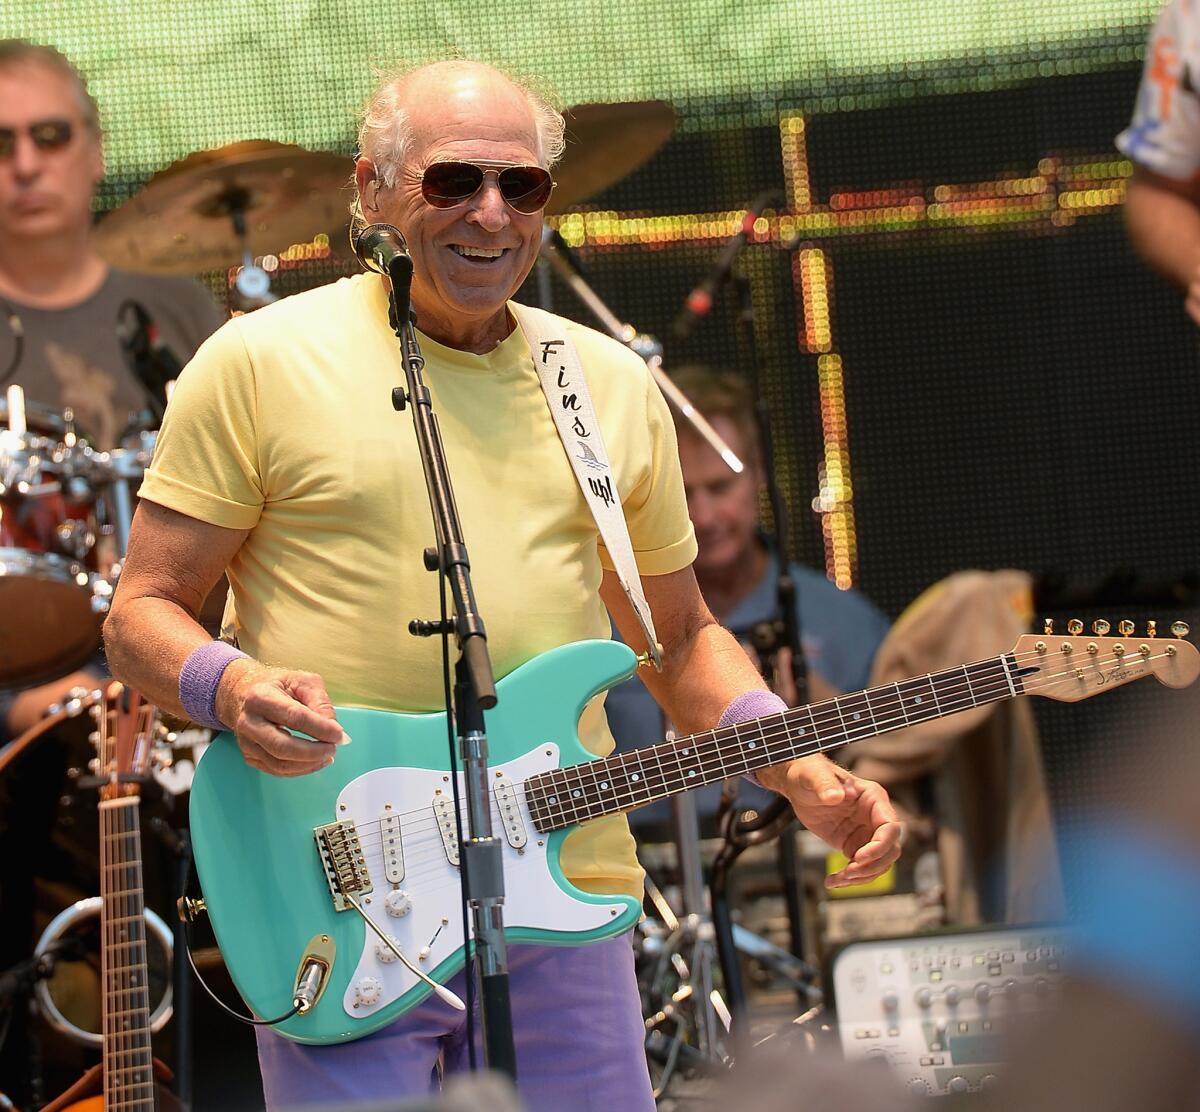 Jimmy Buffett in Florida in November 2015. (Gustavo Caballero / Getty Images)